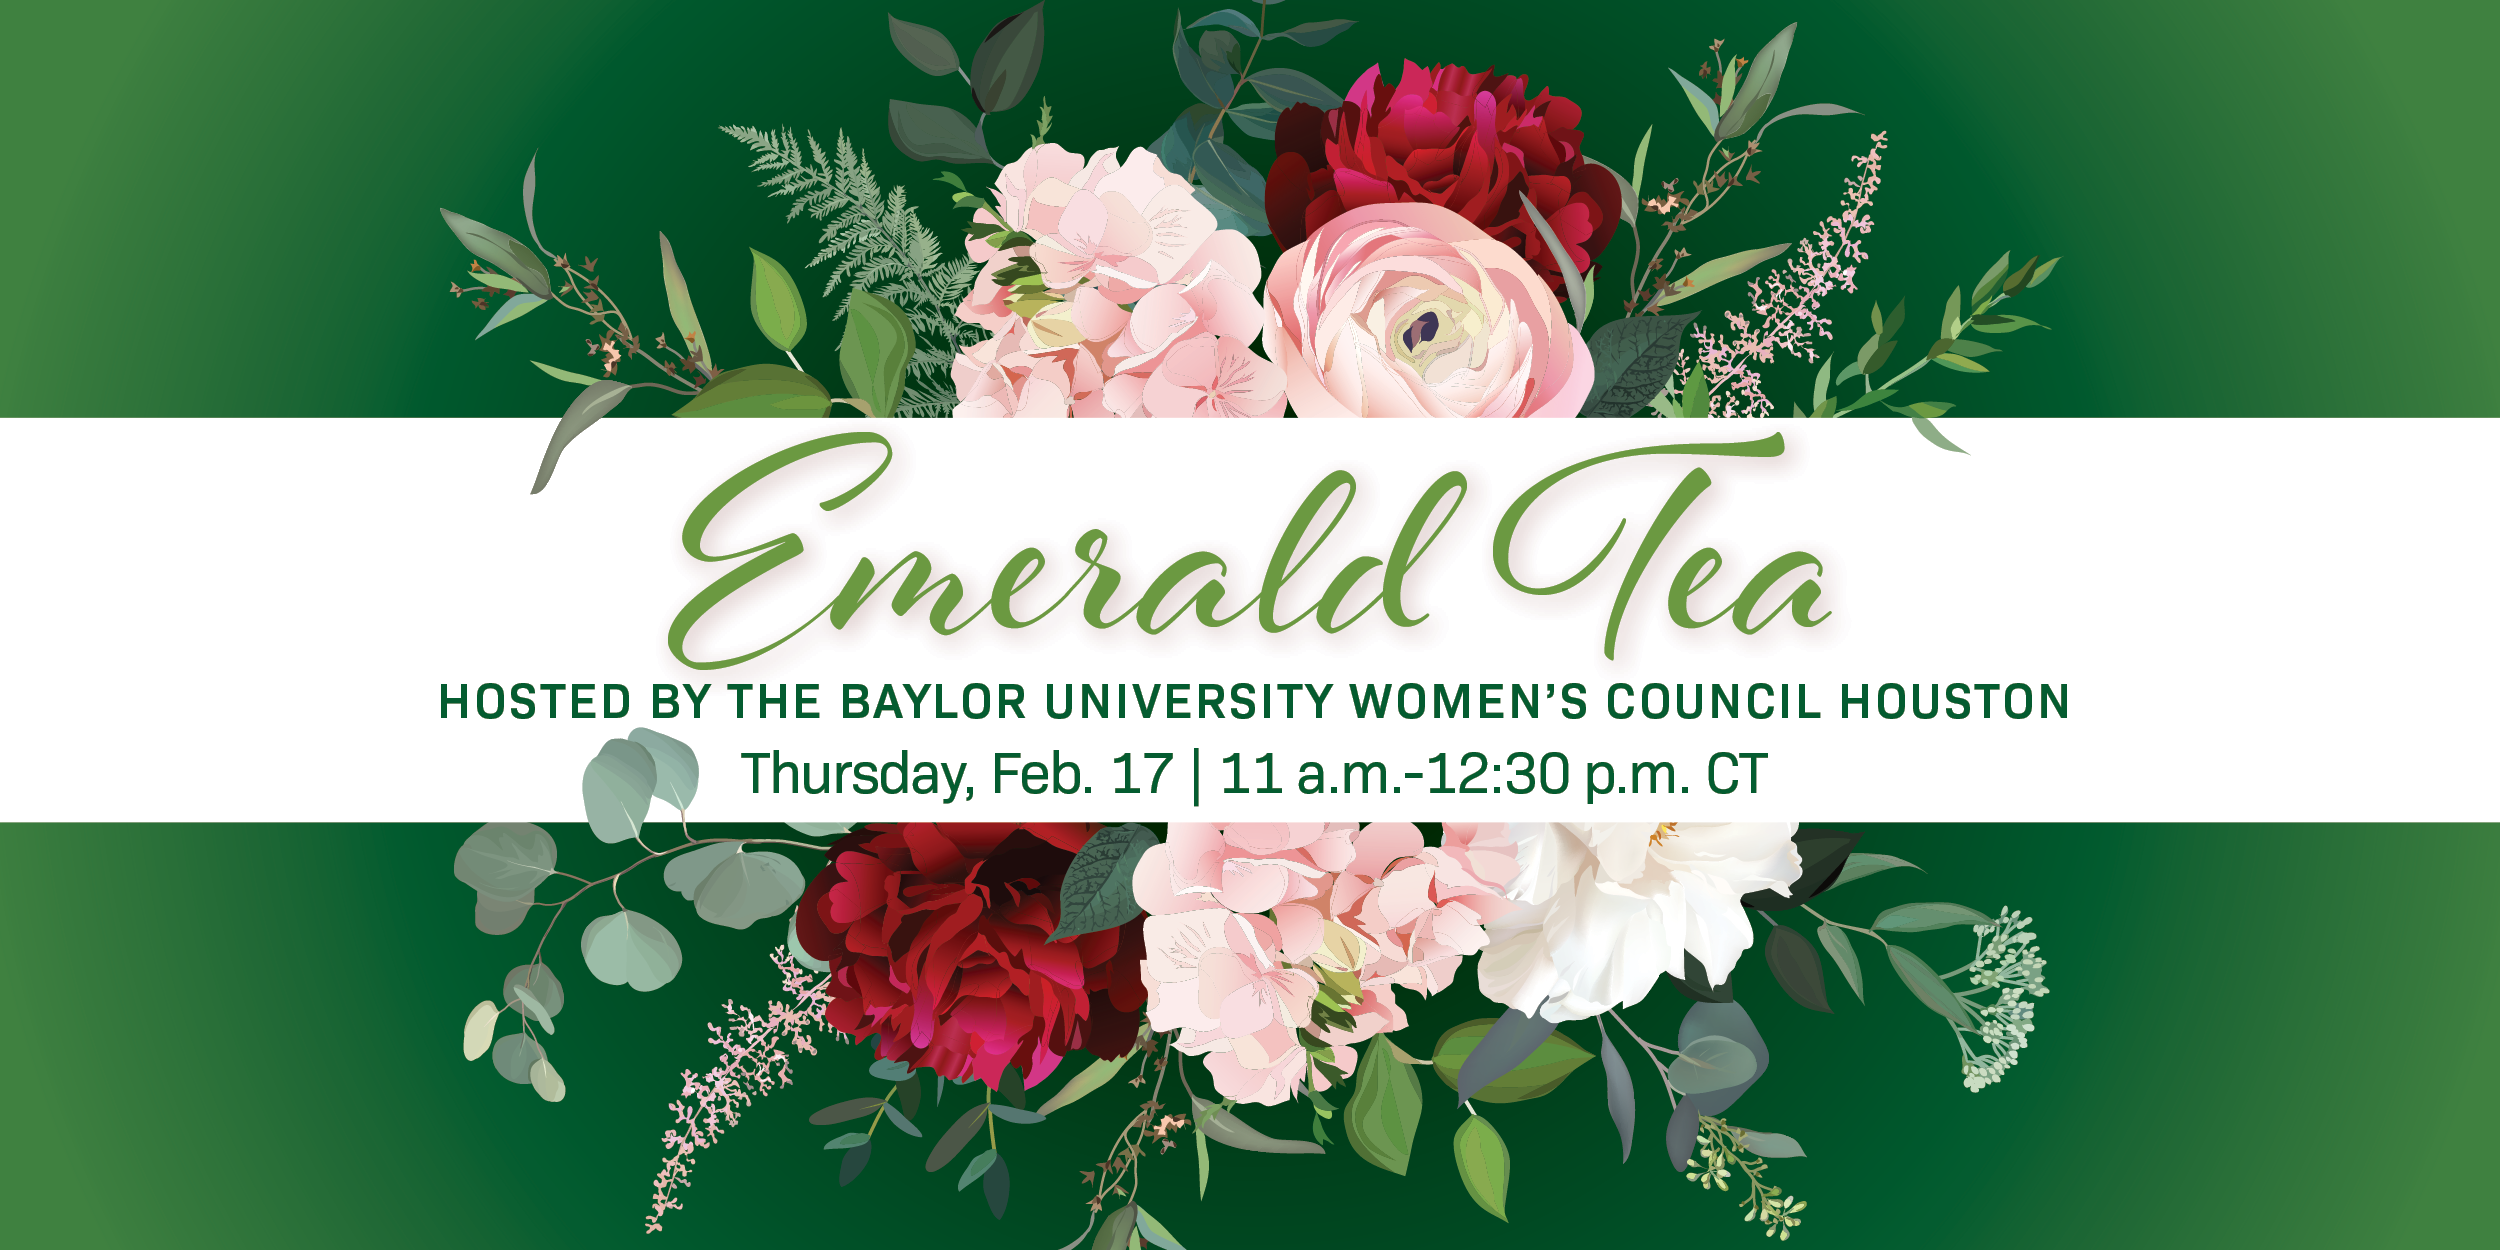 Emerald Tea, Hosted by Baylor University Women's Council Houston